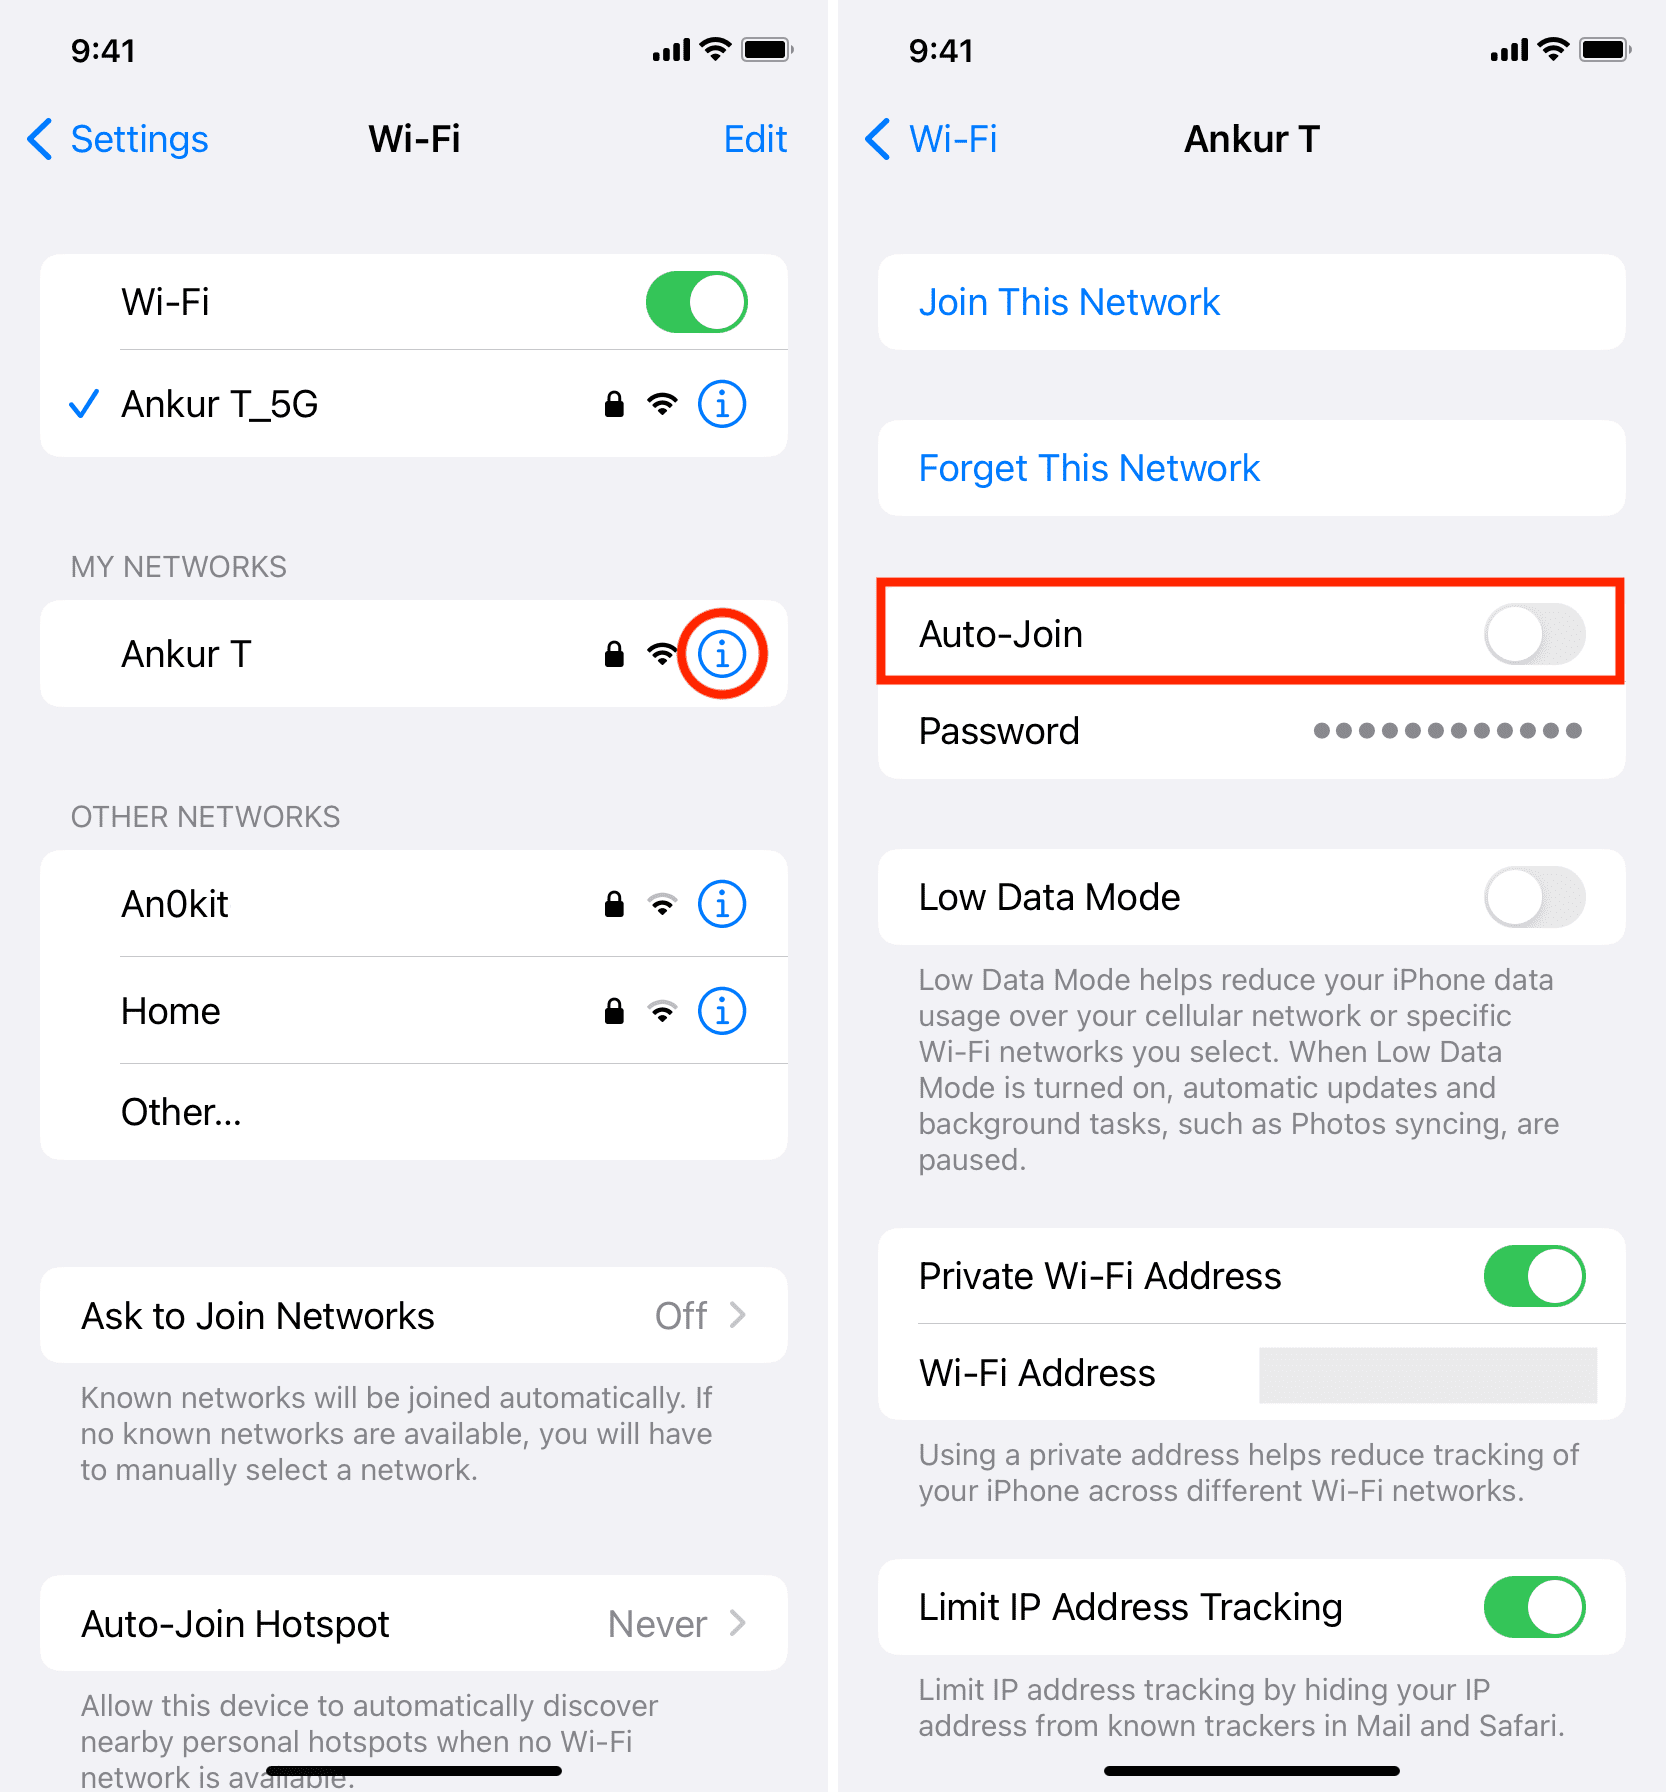 Disable Auto-Join for slower Wi-Fi in iPhone settings